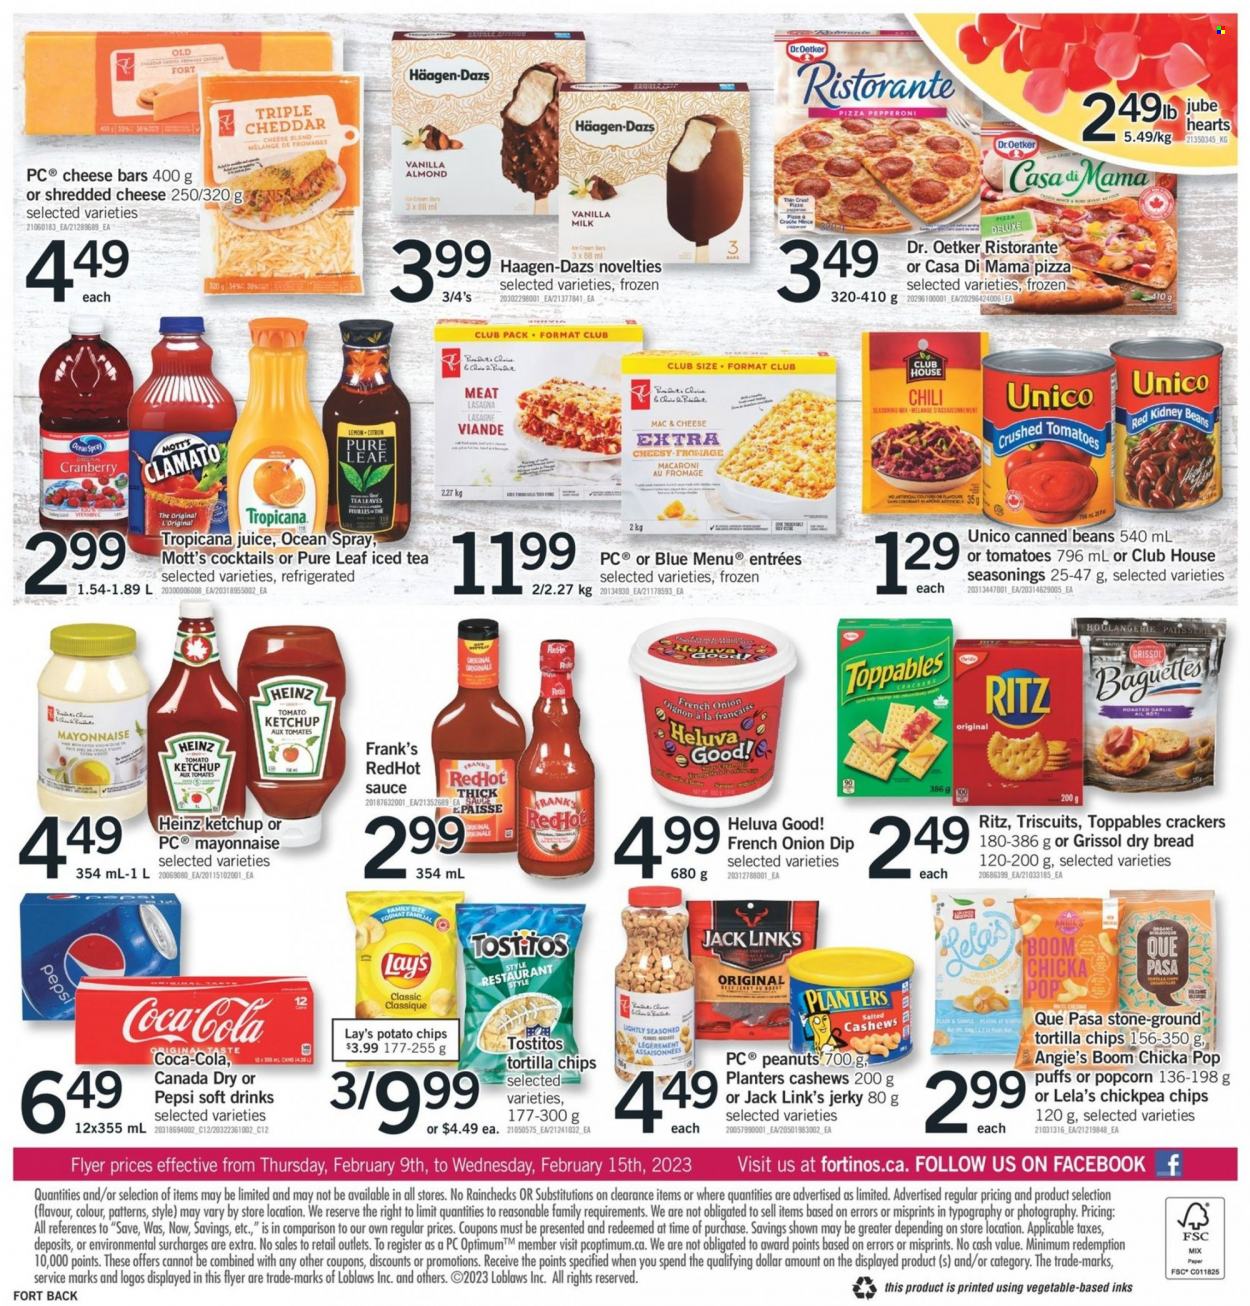 thumbnail - Fortinos Flyer - February 09, 2023 - February 15, 2023 - Sales products - bread, puffs, beans, Mott's, pizza, macaroni, sauce, lasagna meal, jerky, pepperoni, shredded cheese, Dr. Oetker, milk, mayonnaise, dip, Häagen-Dazs, crackers, RITZ, tortilla chips, potato chips, Lay’s, popcorn, Tostitos, Jack Link's, crushed tomatoes, kidney beans, spice, cashews, peanuts, Planters, Canada Dry, Coca-Cola, Pepsi, juice, ice tea, Clamato, soft drink, Pure Leaf, paper, vitamin c, baguette, Heinz, ketchup. Page 2.